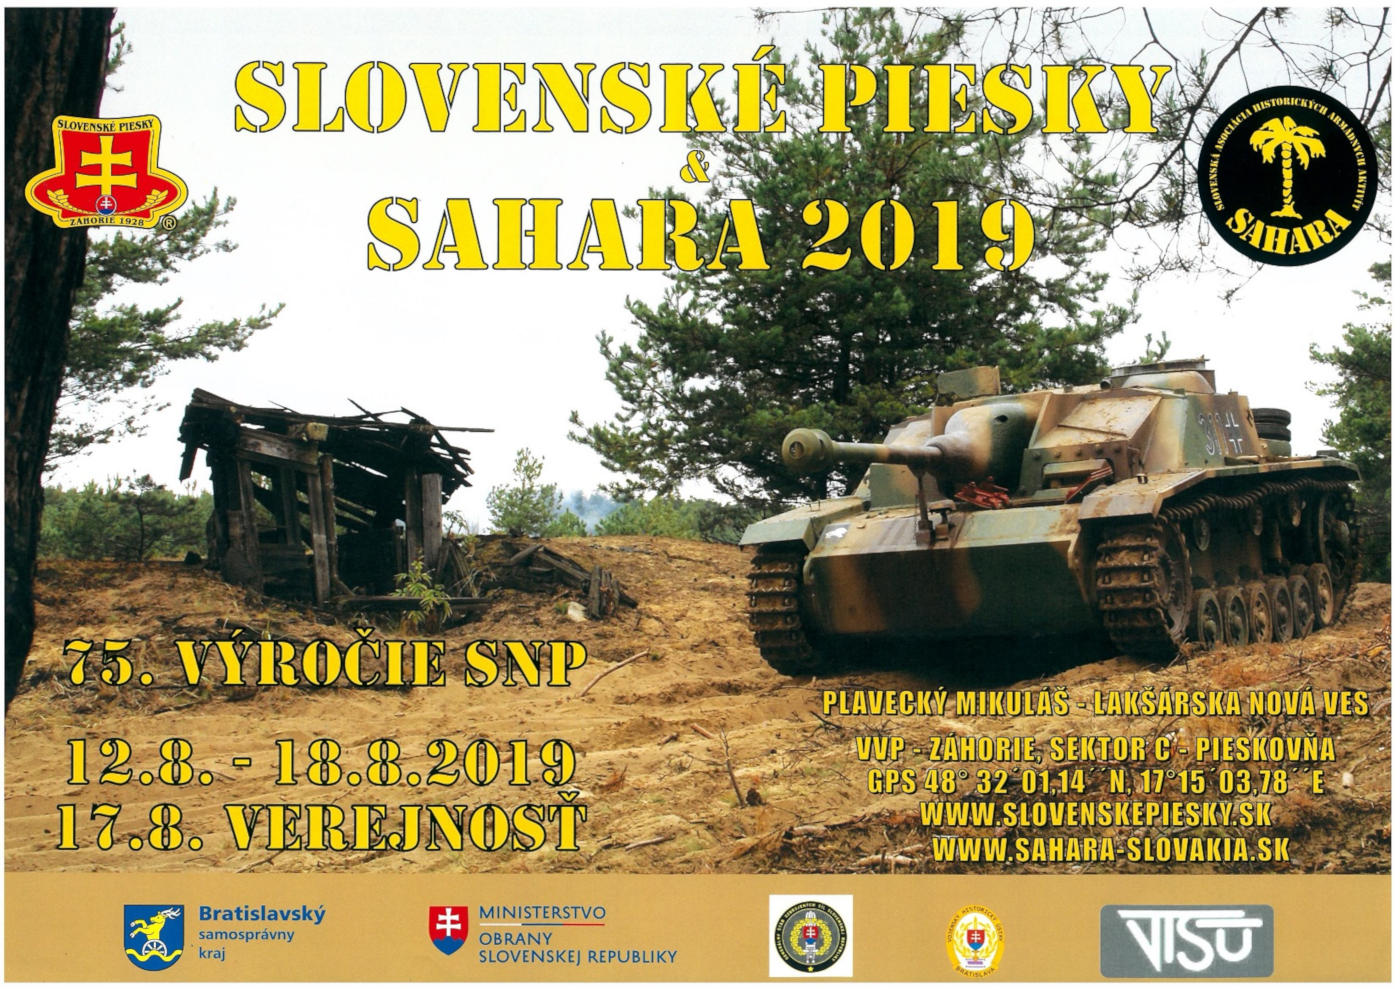 August 12-18, 2019: First Joint Military Vehicle Gathering